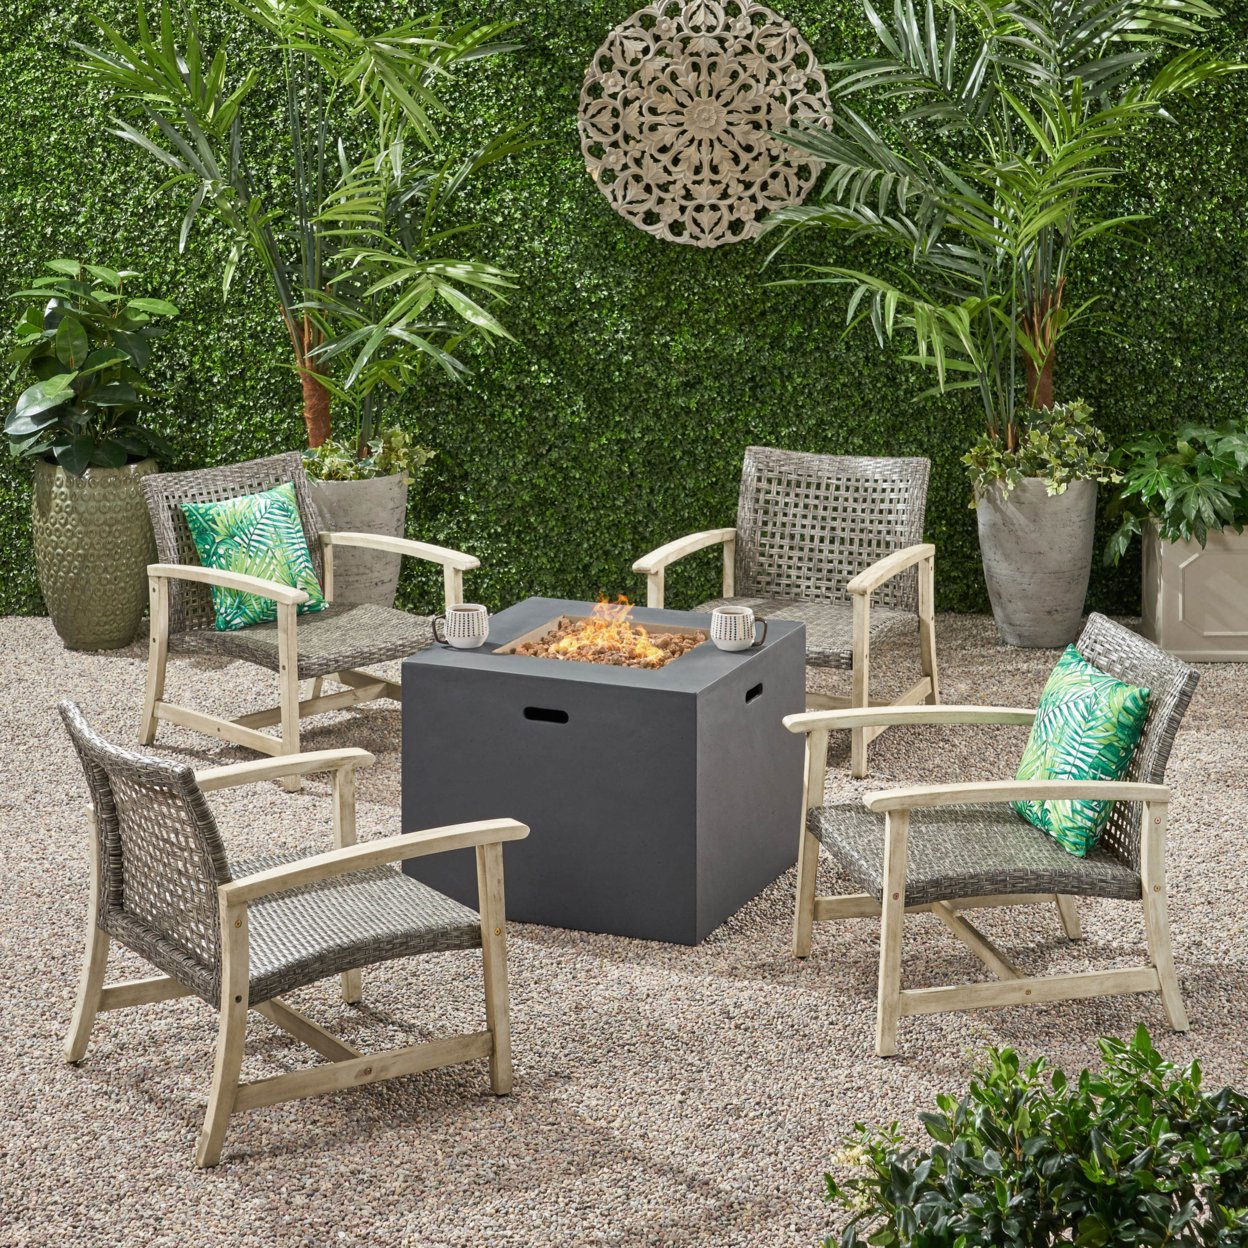 Carry Outdoor 5 Piece Wood And Wicker Club Chairs And Fire Pit Set - Mixed Black, Light Gray Washed Finish, Dark Gray